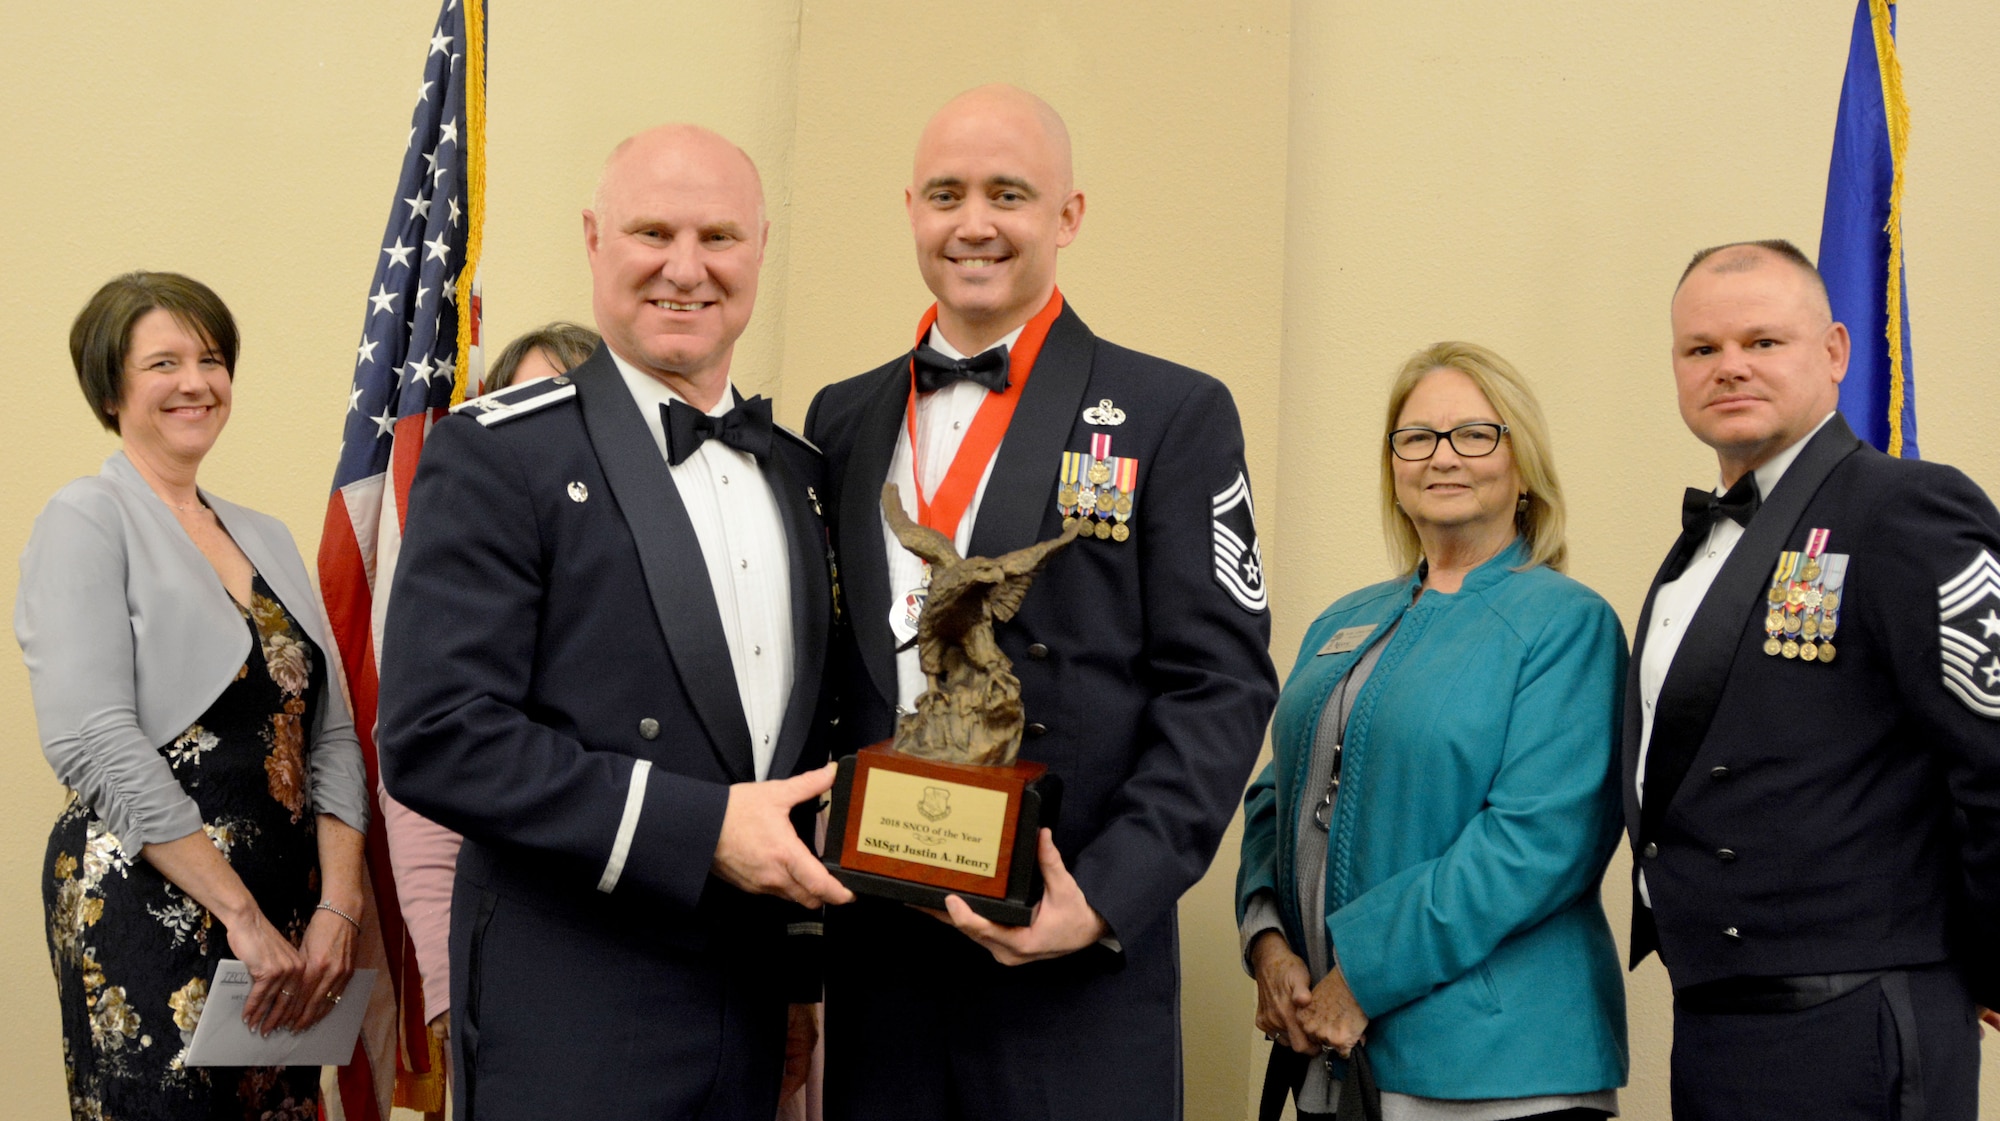 Col. Miles Heaslip, 507th Air Refueling Wing commander, and Chief Master Sgt. David Dickson, 507th ARW command chief, along with wing community partners, present the 2018 507th ARW Senior Noncommissioned Officer of the Year award to Senior Master Sgt. Justin Henry, 507th Aircraft Maintenance Squadron, March 2, 2019, in Midwest City, Oklahoma. (U.S. Air Force photo by Maj. Jon Quinlan)